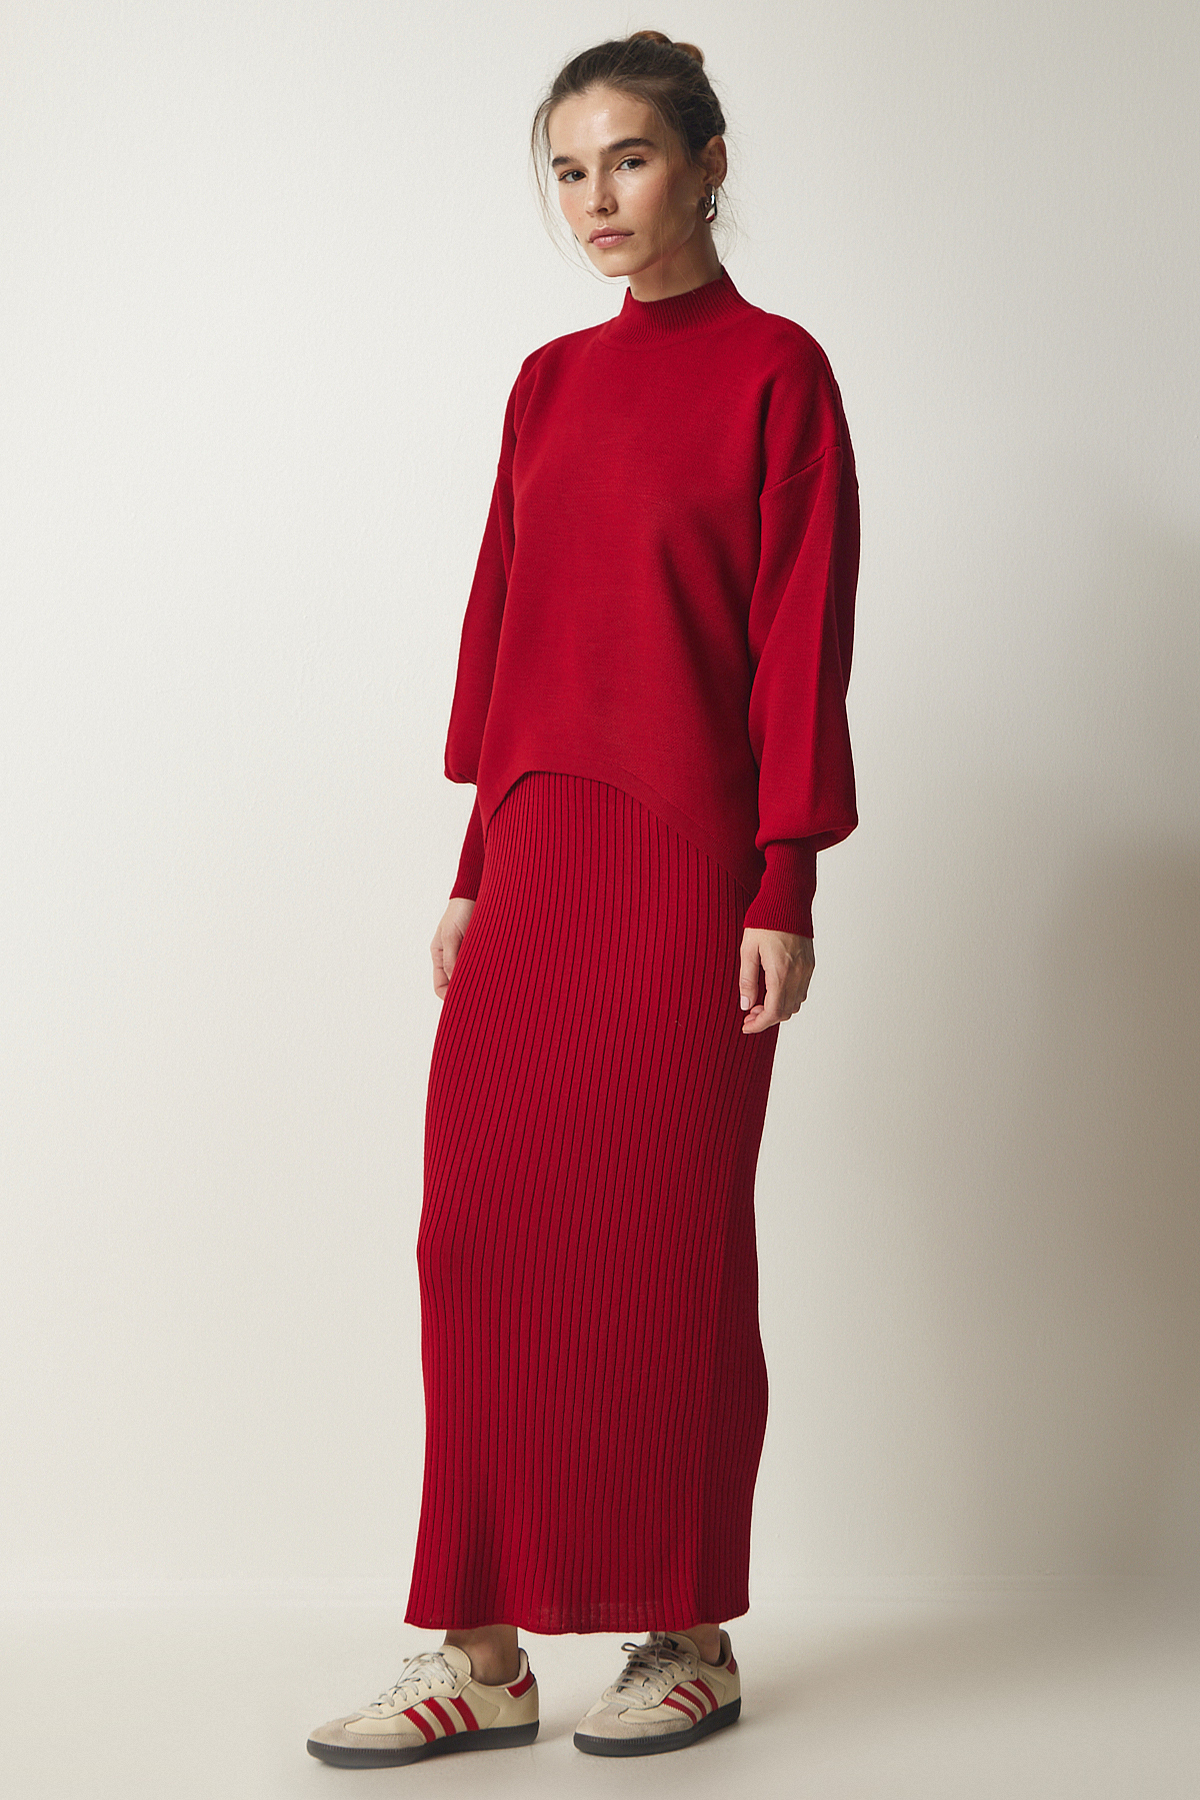 Levně Happiness İstanbul Women's Red Ribbed Knitwear With Sweater Dress